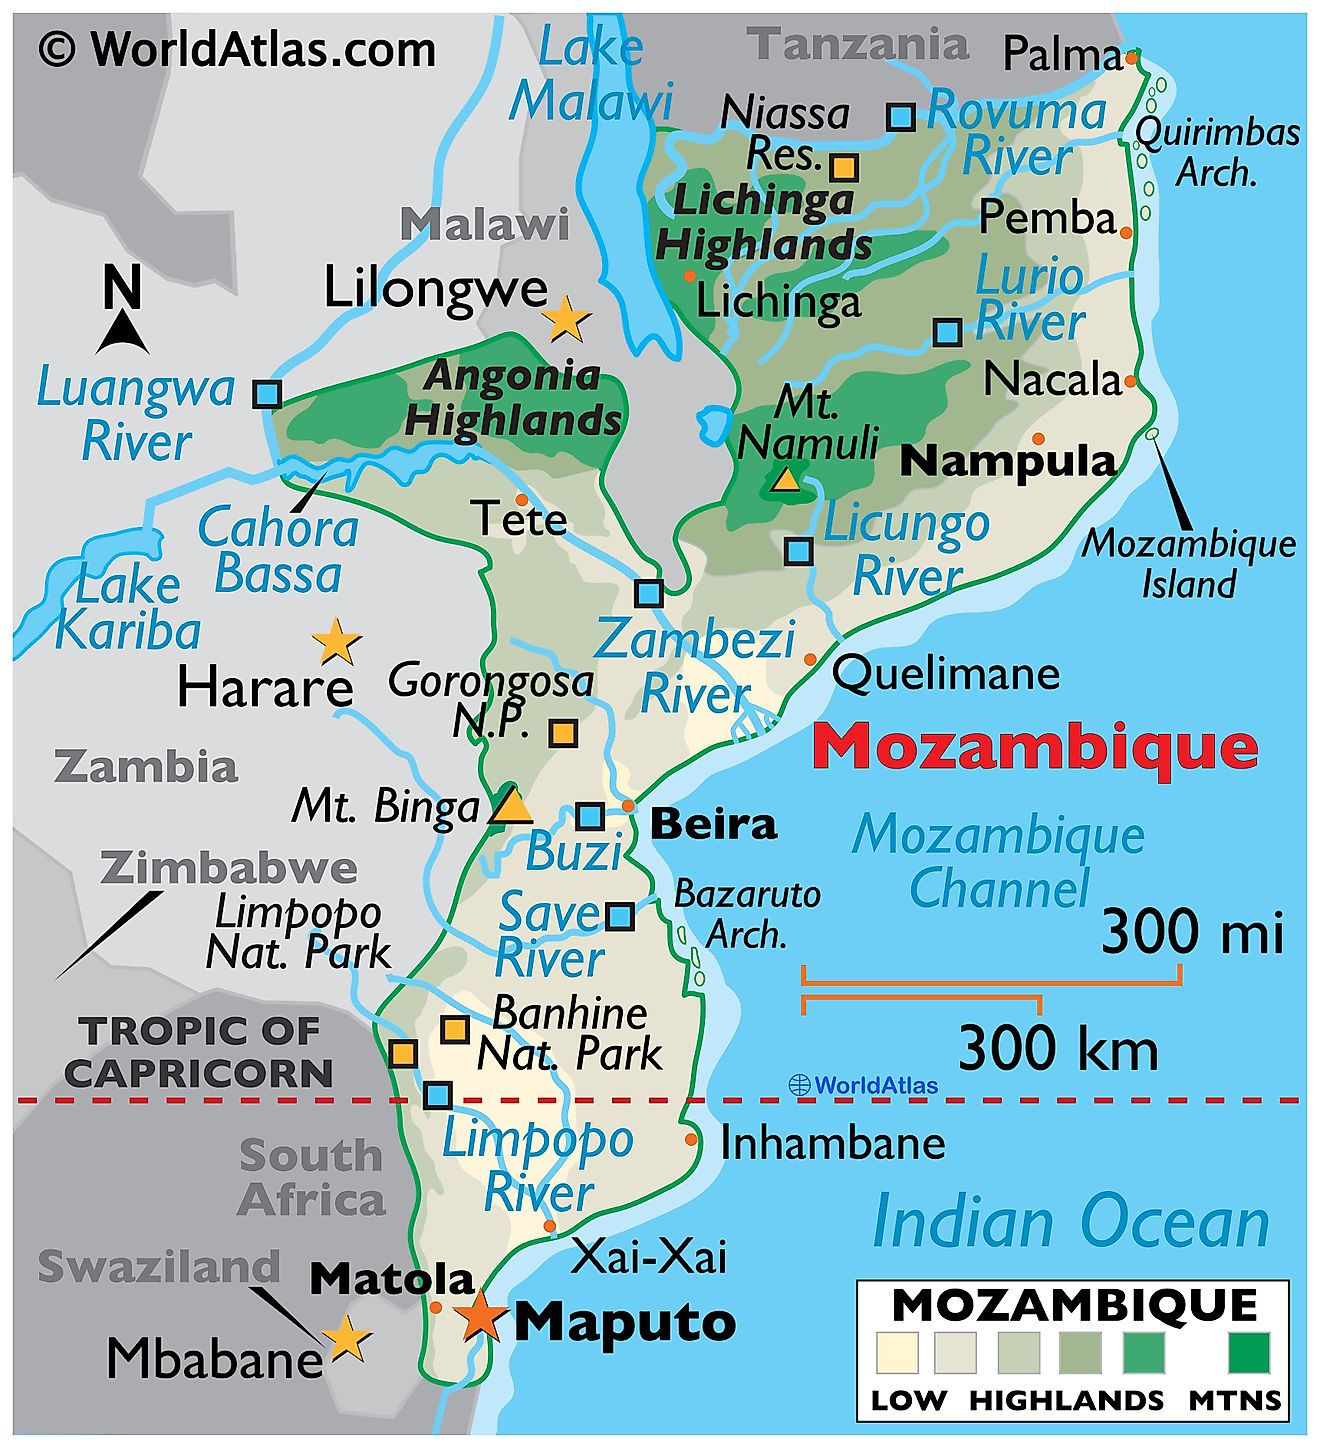 Physical Map of Mozambique with state boundaries. The physical map shows the relief, major mountain ranges, peaks, rivers, lakes, etc.